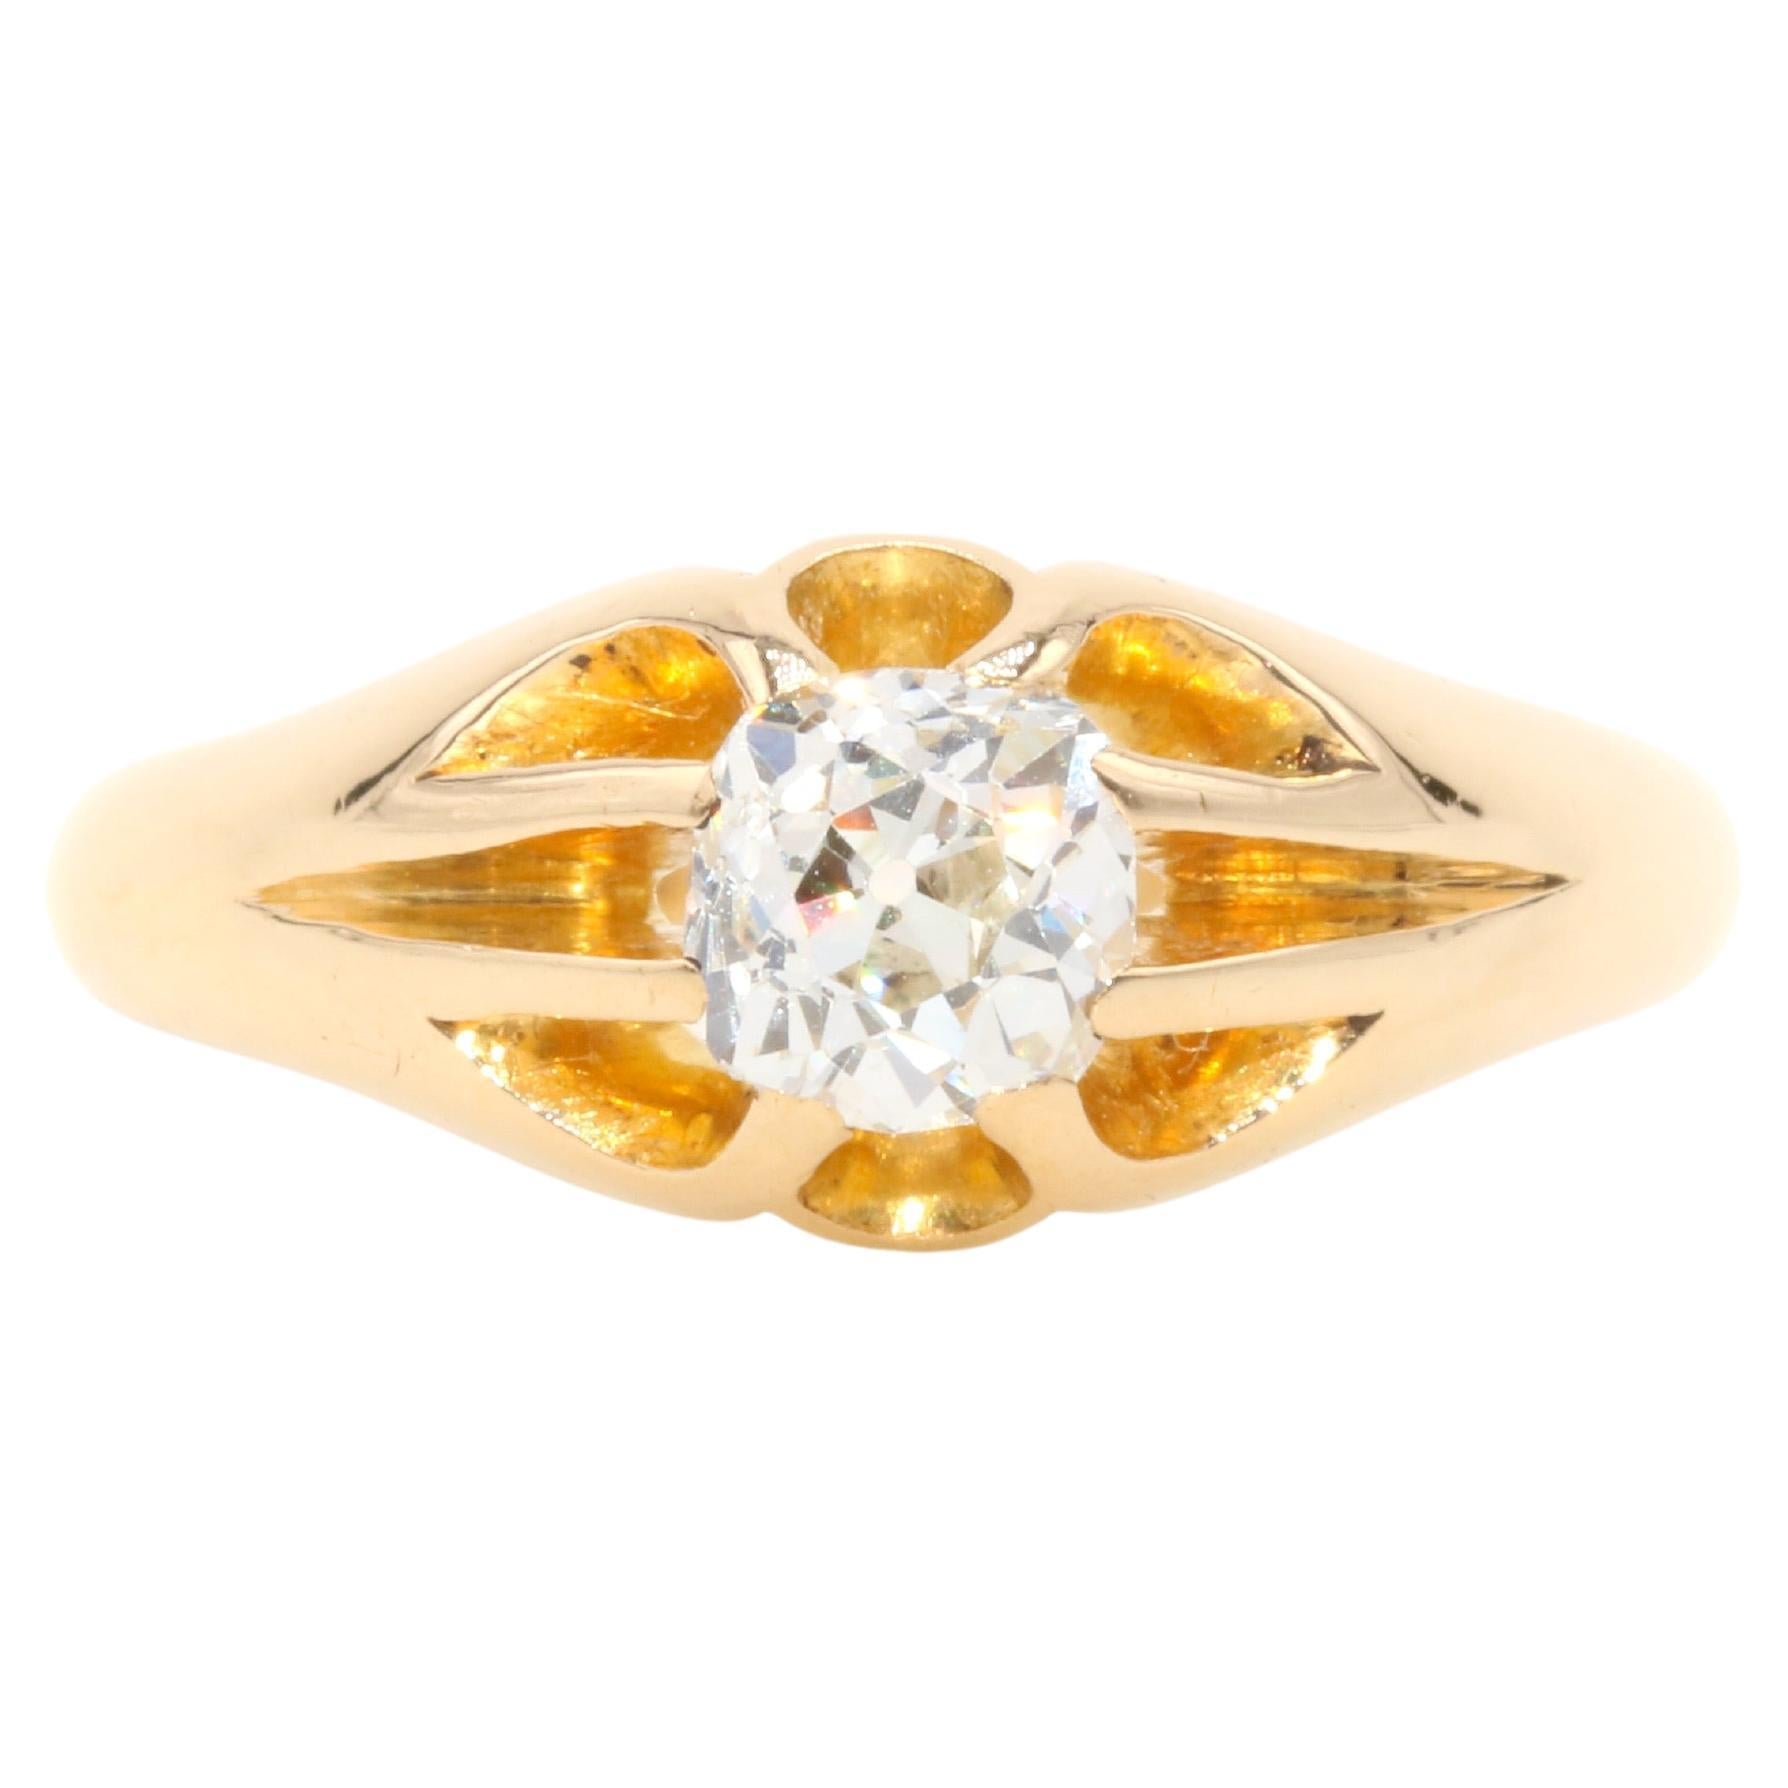 Antique Edwardian 18K Yellow Gold 0.75ct Old Mine Cut Diamond Belcher Ring For Sale